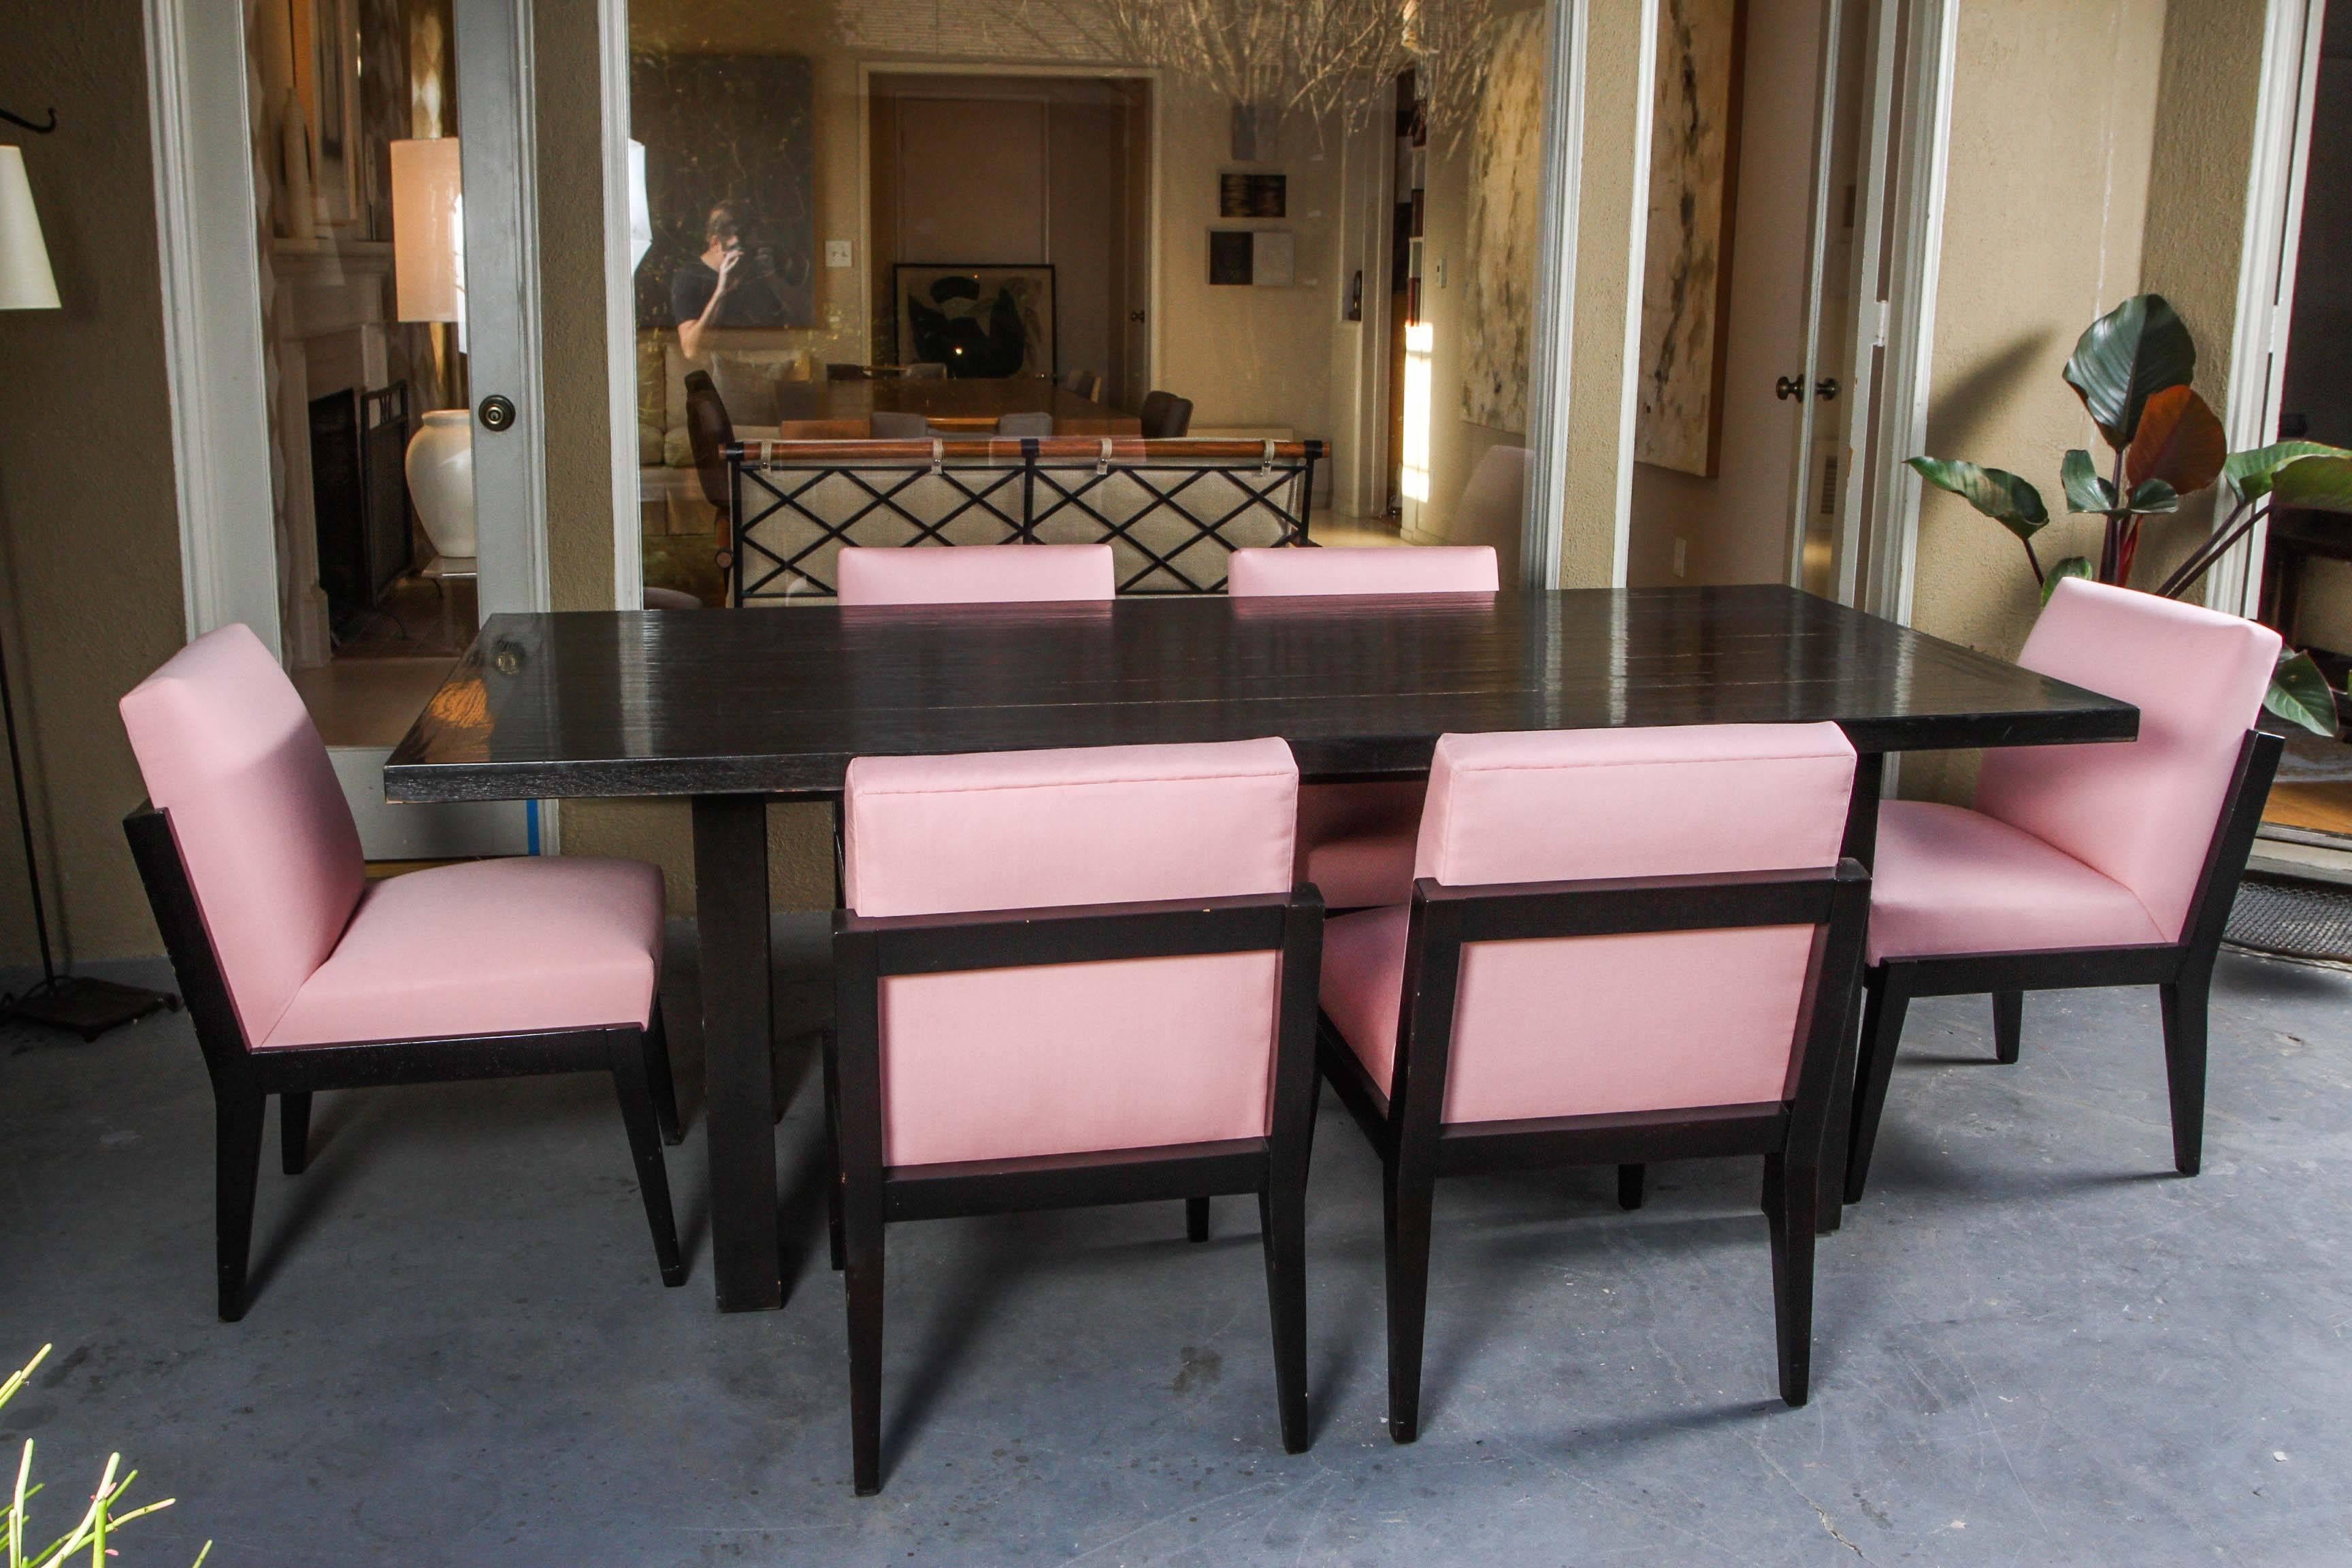 Mid-Century indoor/outdoor black dining table with six dining chairs that have been recovered in a beautiful pink-salmon indoor/outdoor fabric.

Table dimensions:
Width: 84